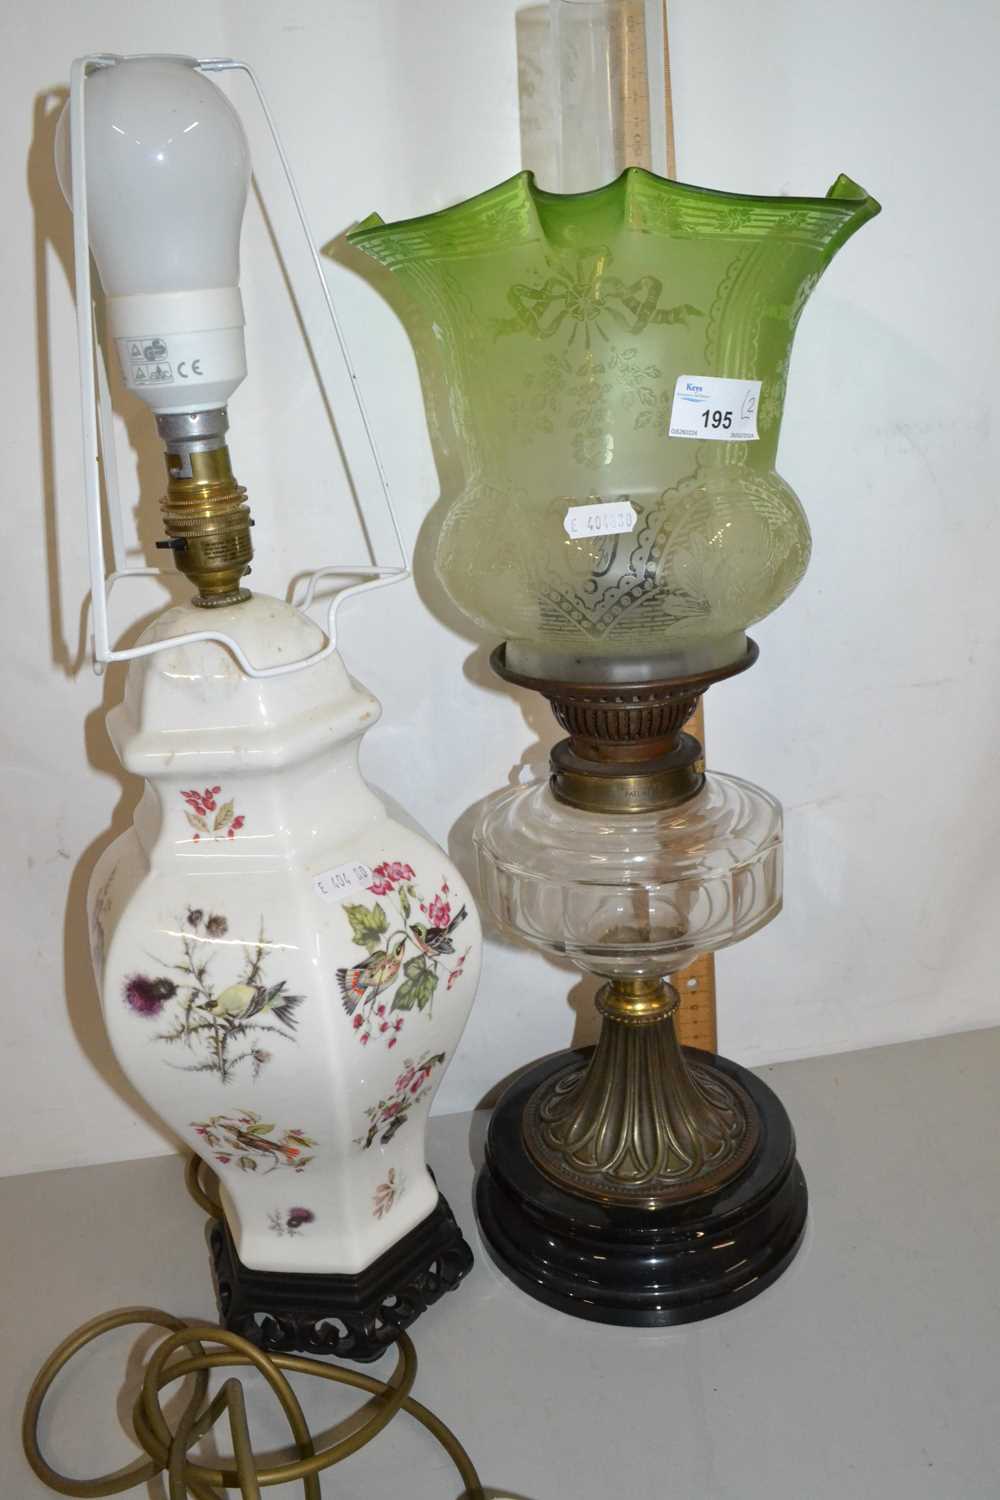 Late Victorian oil lamp with later electrical conversion together with a further table lamp